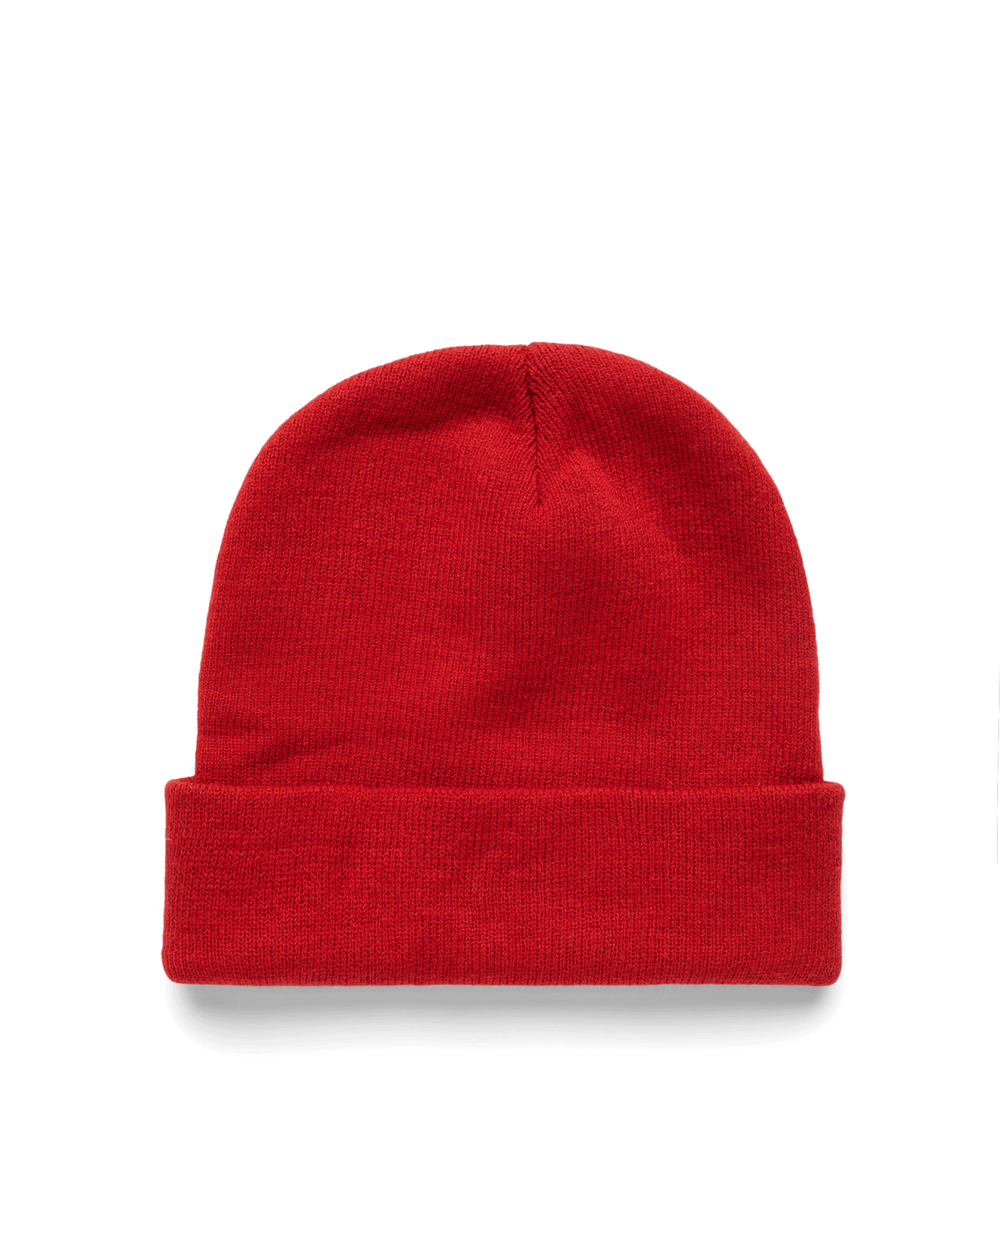 KNIT CUFFED BEANIE | HUMMINGBIRD EMBROIDERED | ARTISANAL RED